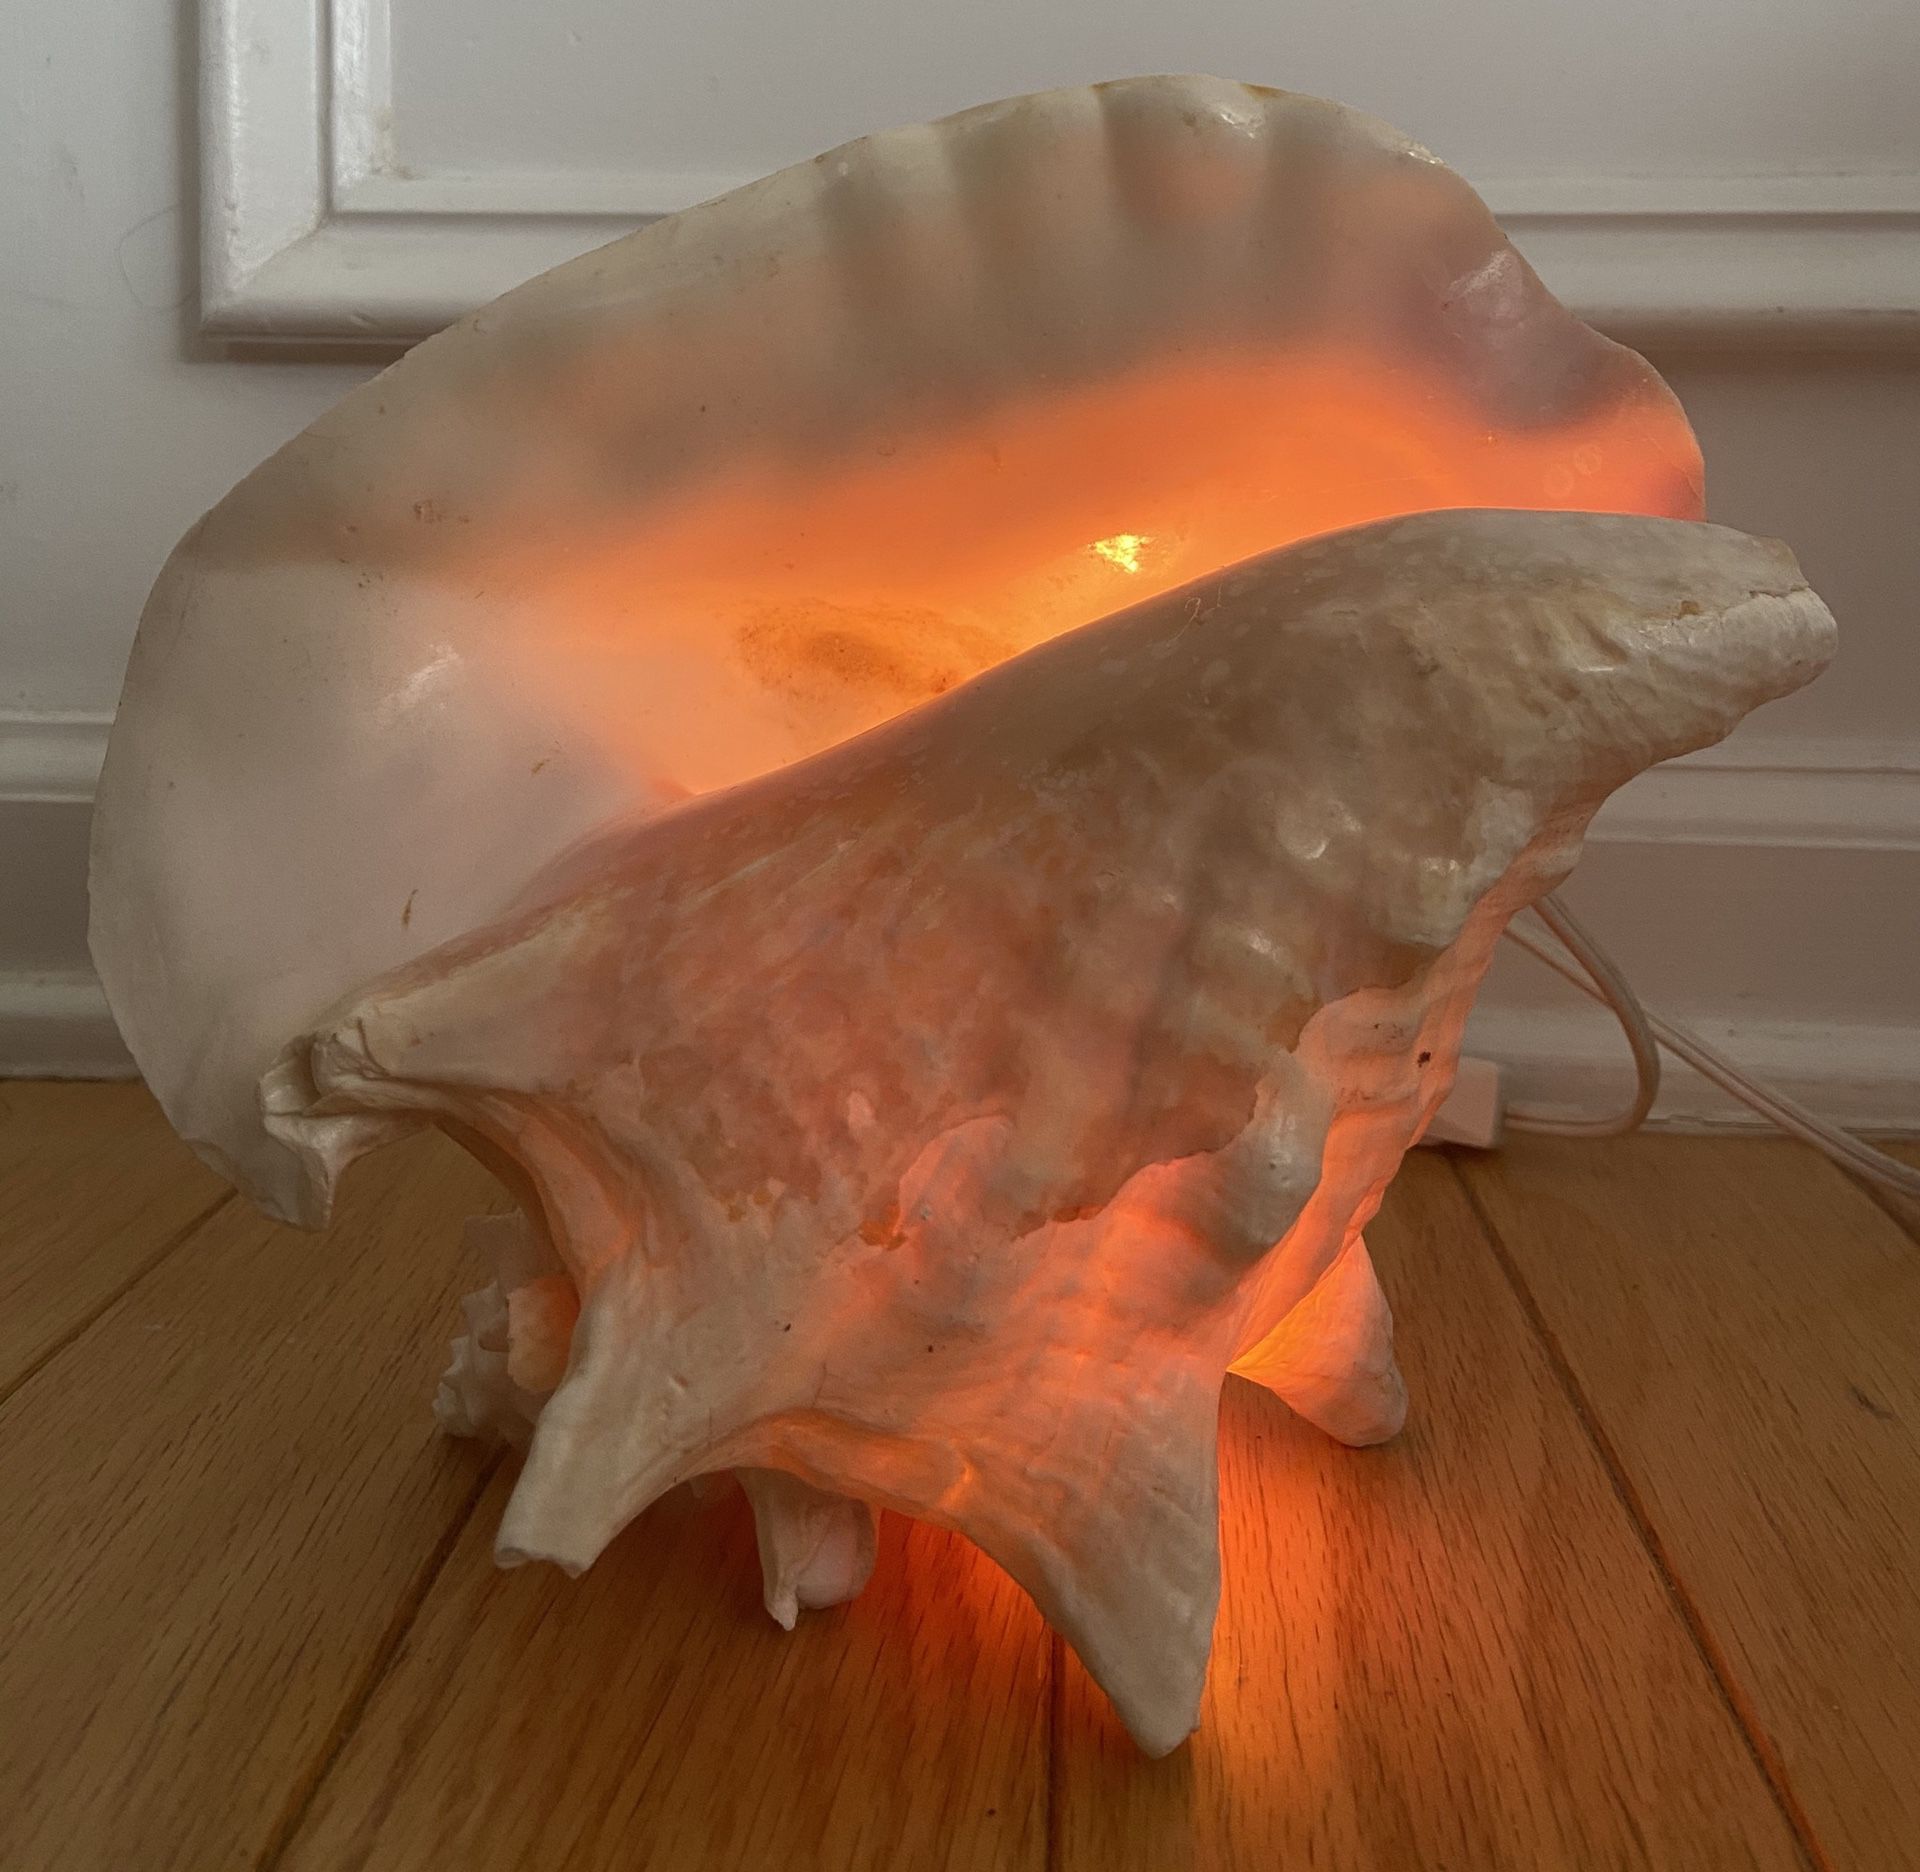 Conch Slit Shell Back 6-8, Queen Shell, Seashell Table Top Centerpiece